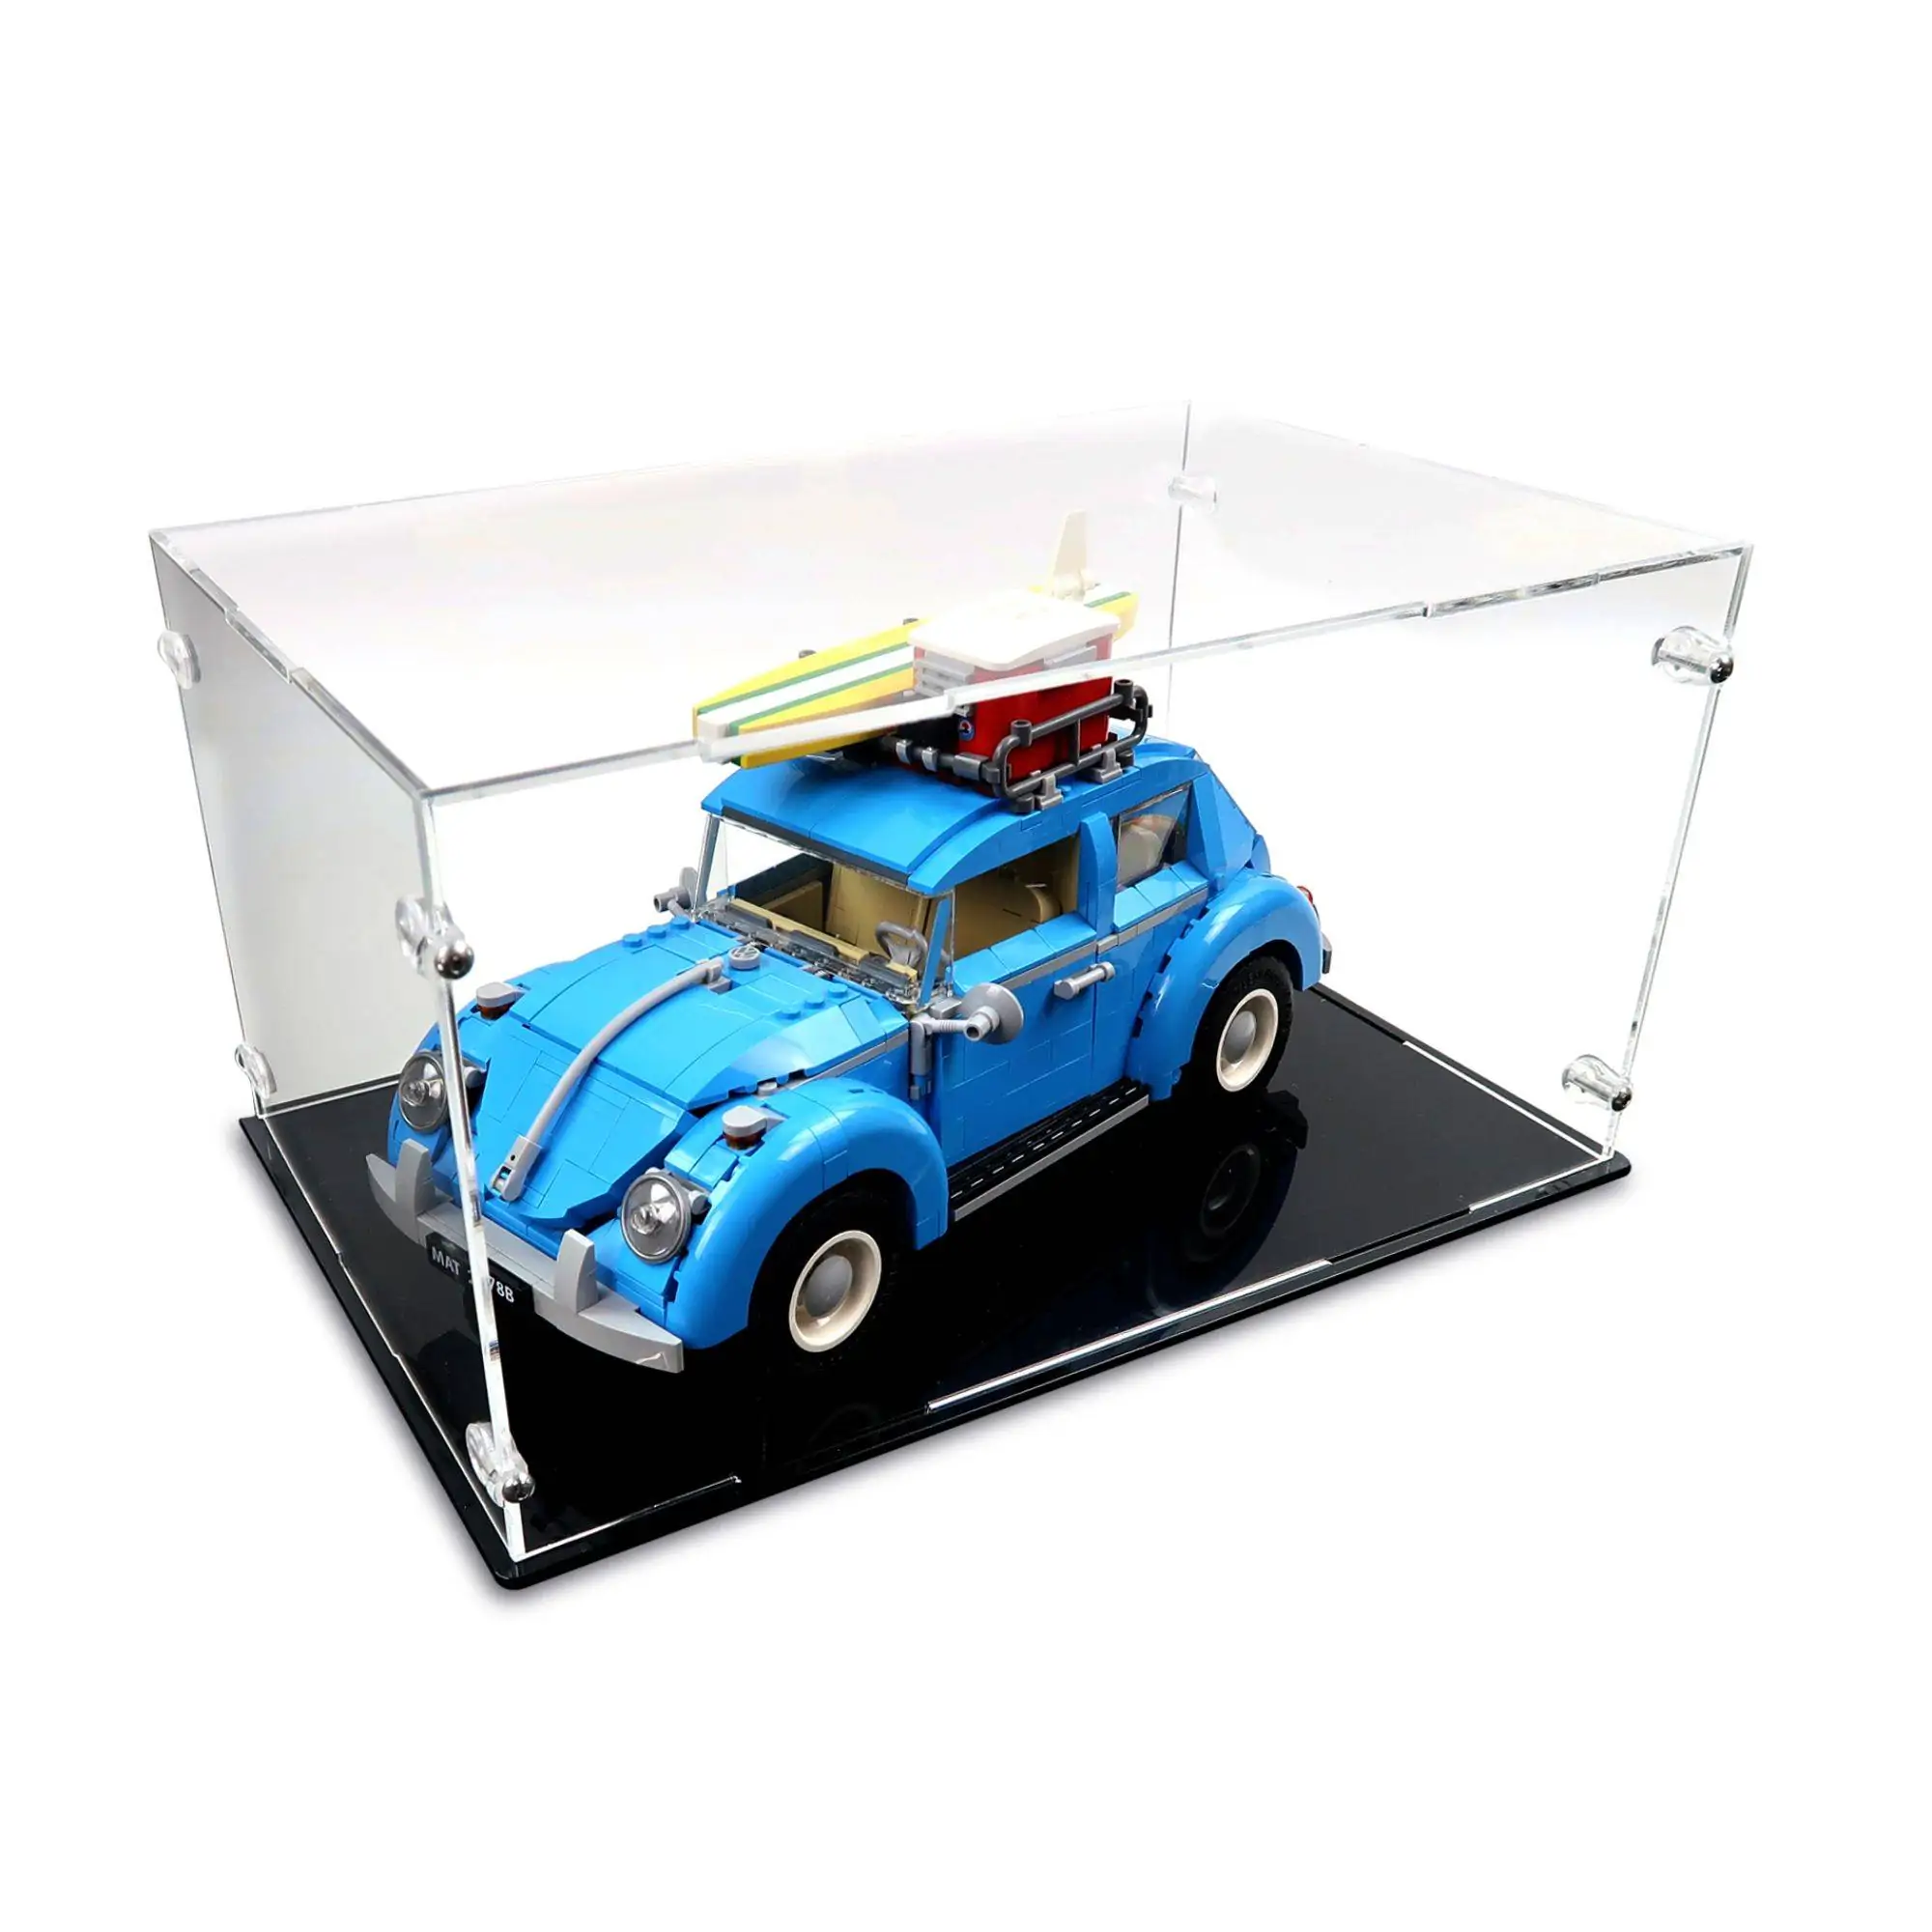 Claire hul Afvigelse Acrylic Display Case for LEGO Volkswagen Beetle | iDisplayit